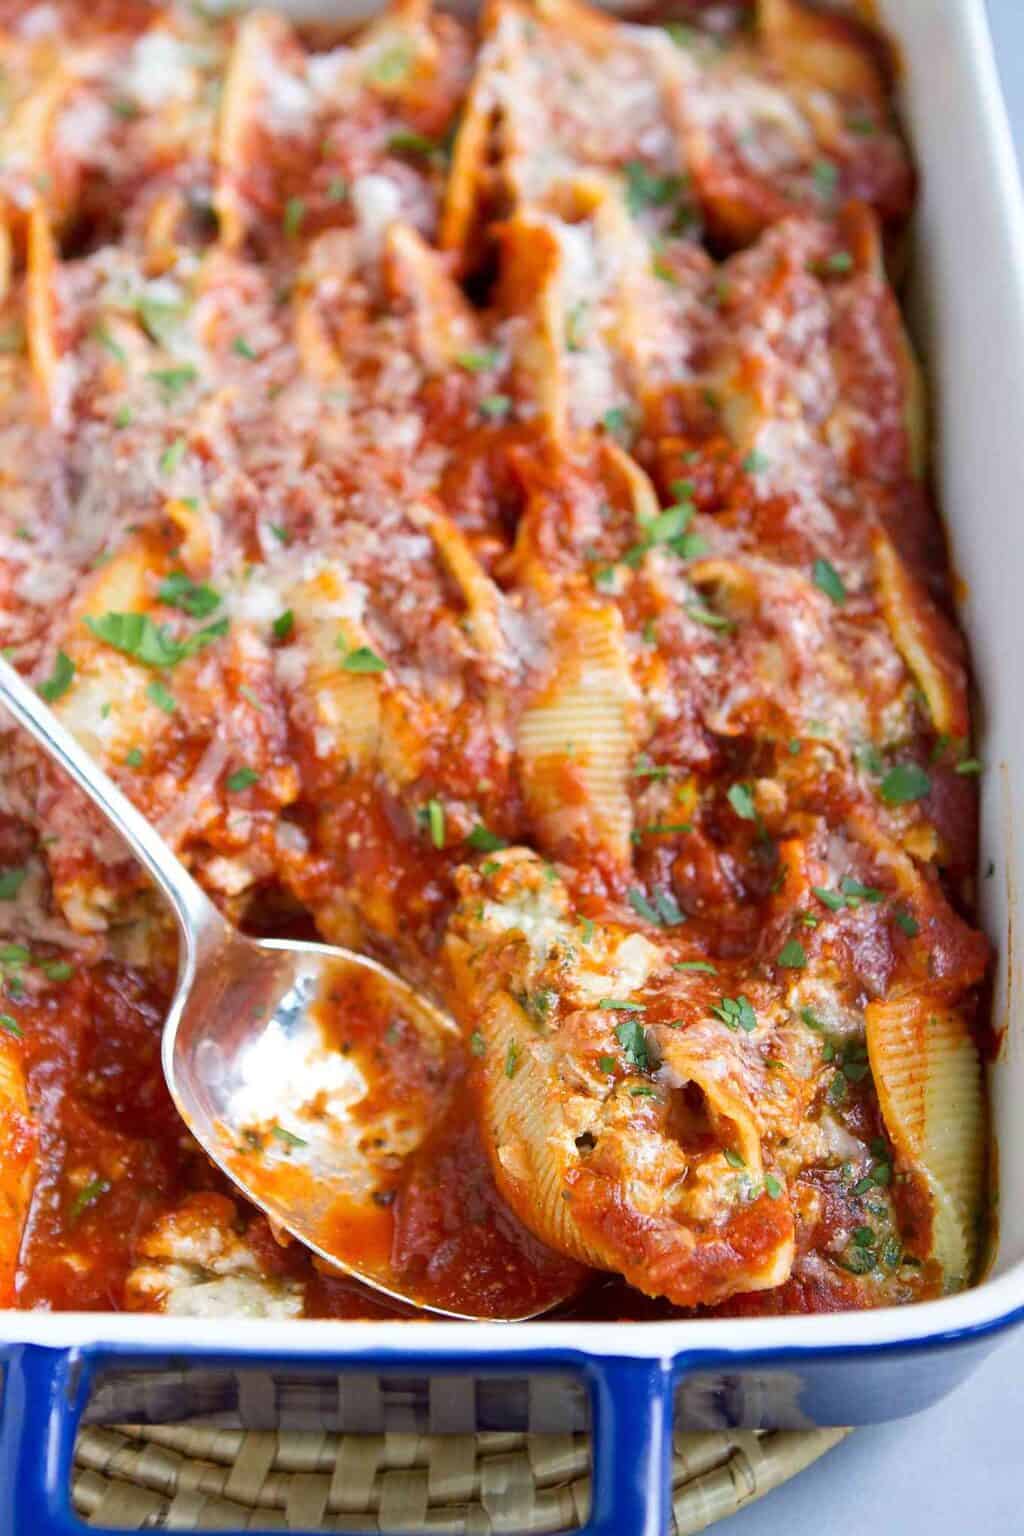 This pesto turkey stuffed shells recipe is lightened up with one of my favorite baked pasta tricks. They were an immediate hit with my whole family! 321 calories and 9 Weight Watchers SP | Recipe | Easy | Spinach | Cheese | Healthy | Skinny #stuffedshells #stuffedshellsrecipe #groundturkeyrecipes #bakedpasta #feedacrowd #weightwatchers #smartpoints